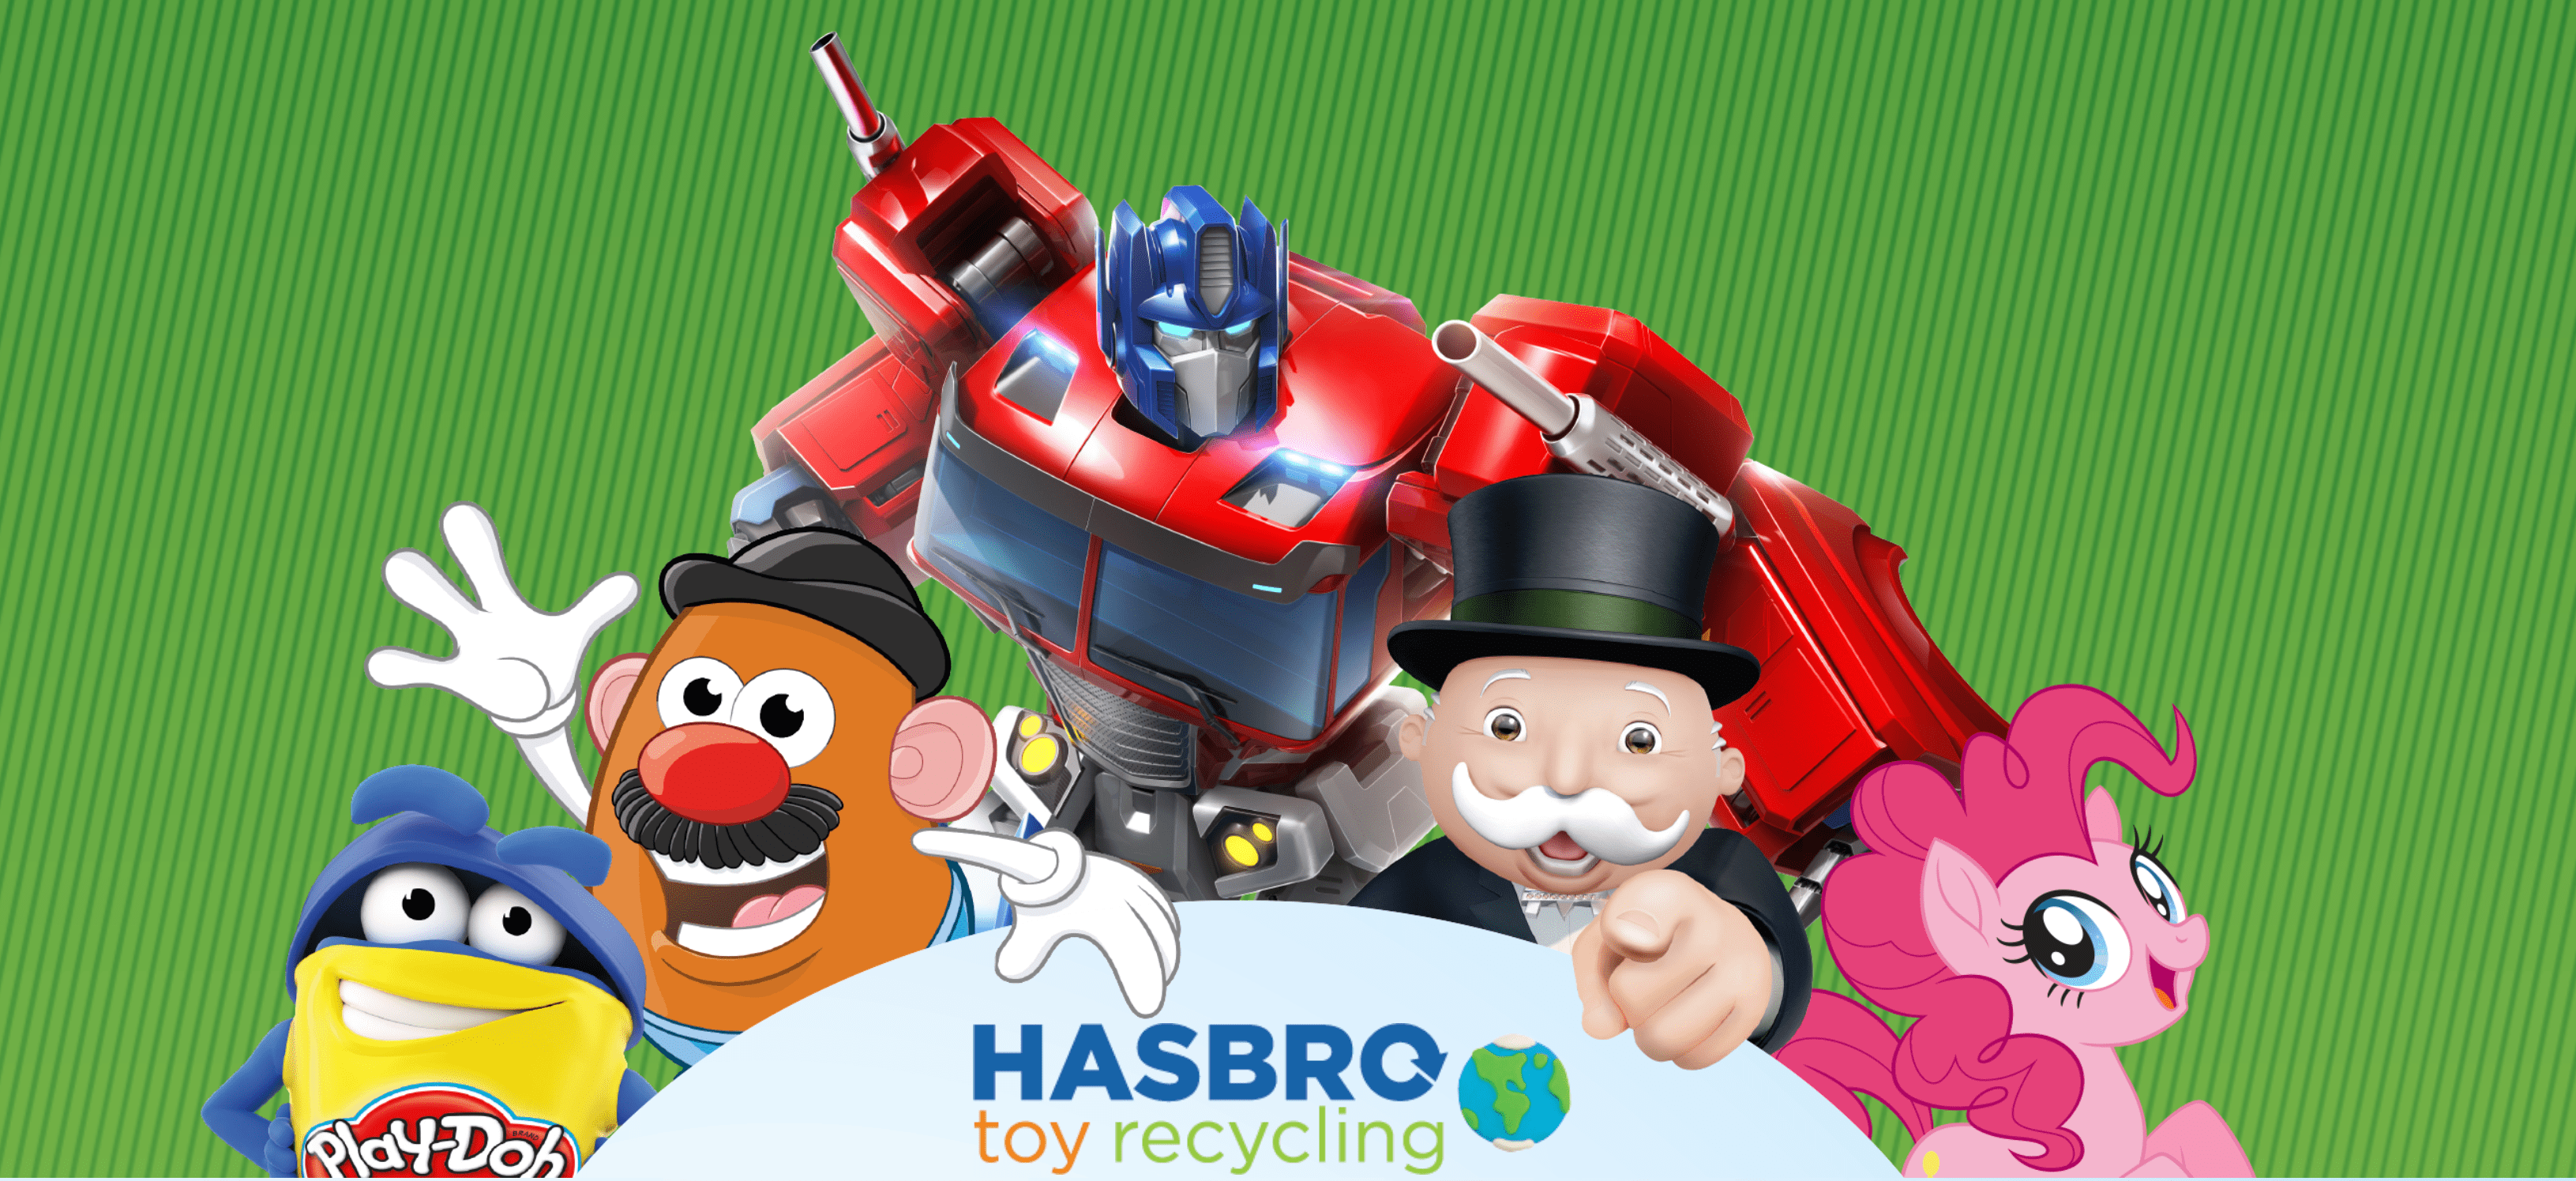 Toy Recycling Program - Hasbro Toy Recycling